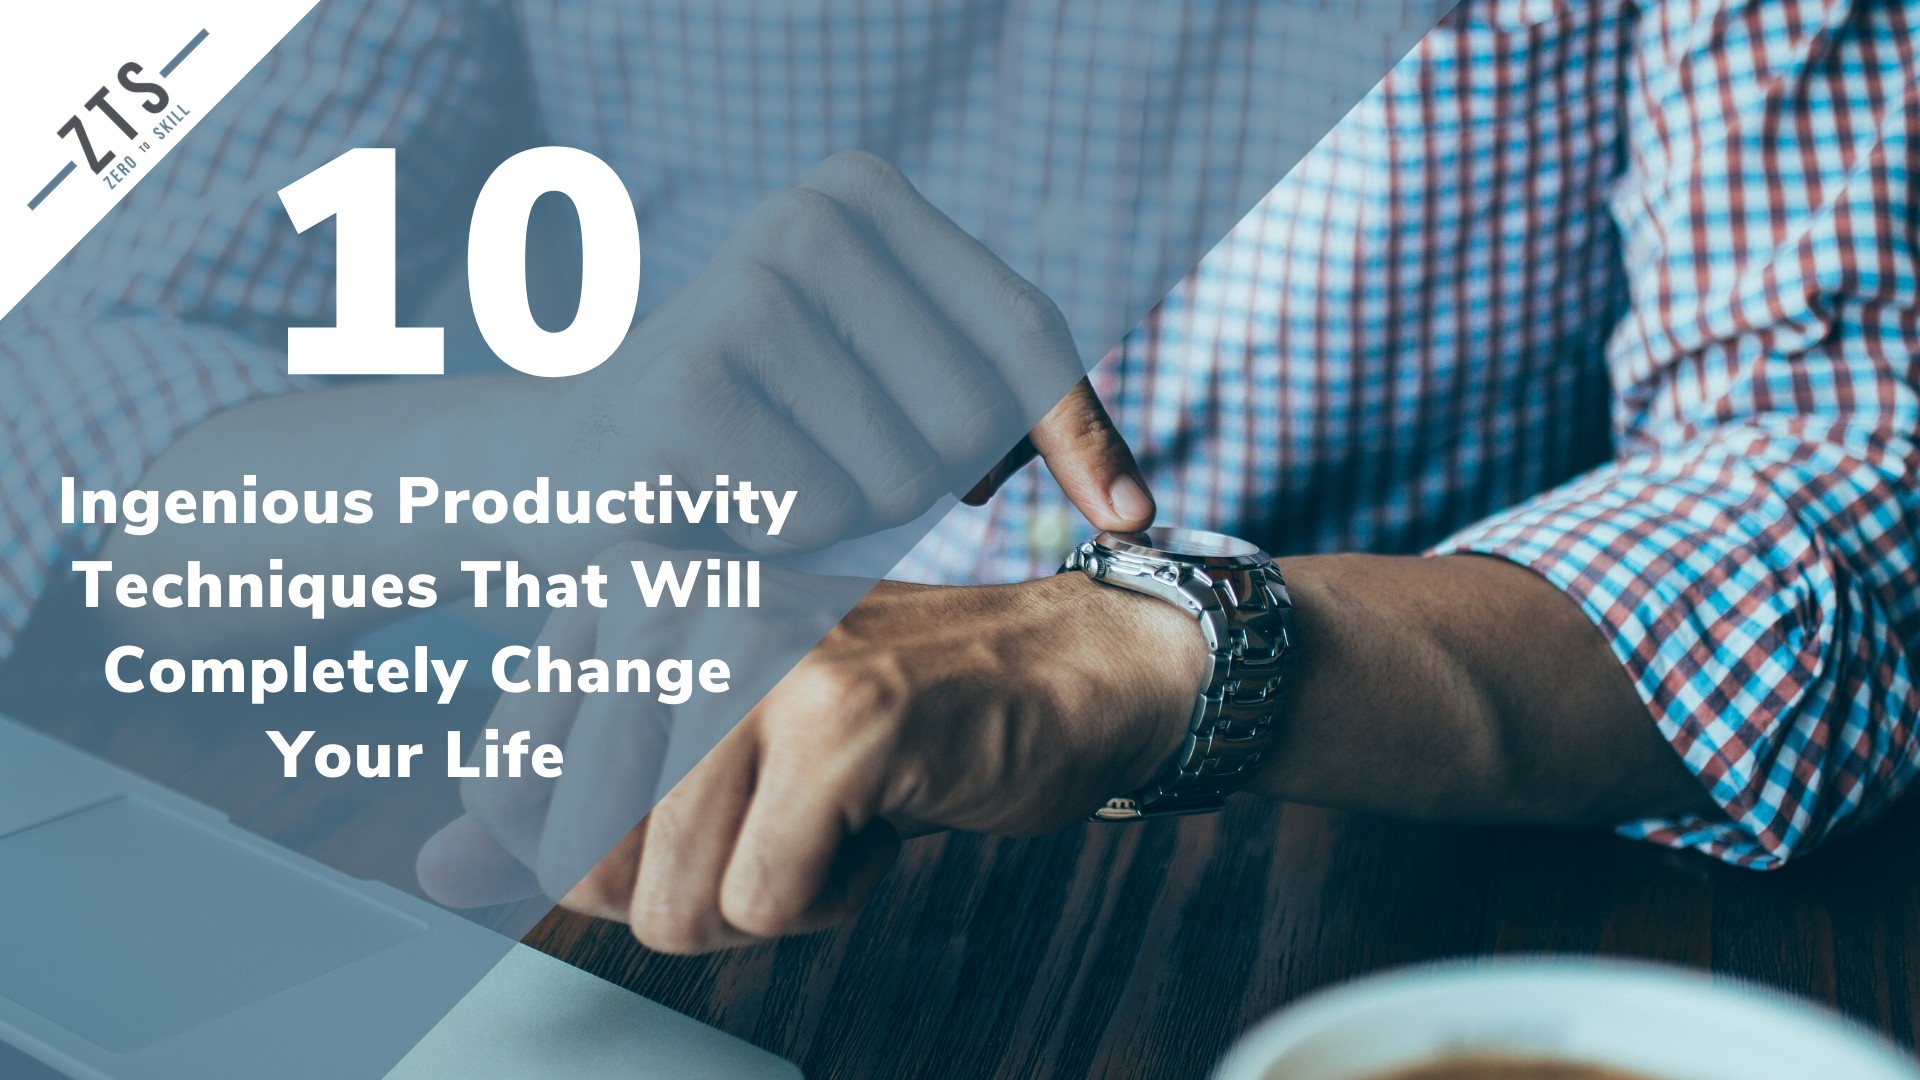 10 Ingenious Productivity Techniques That Will Completely Change Your Life